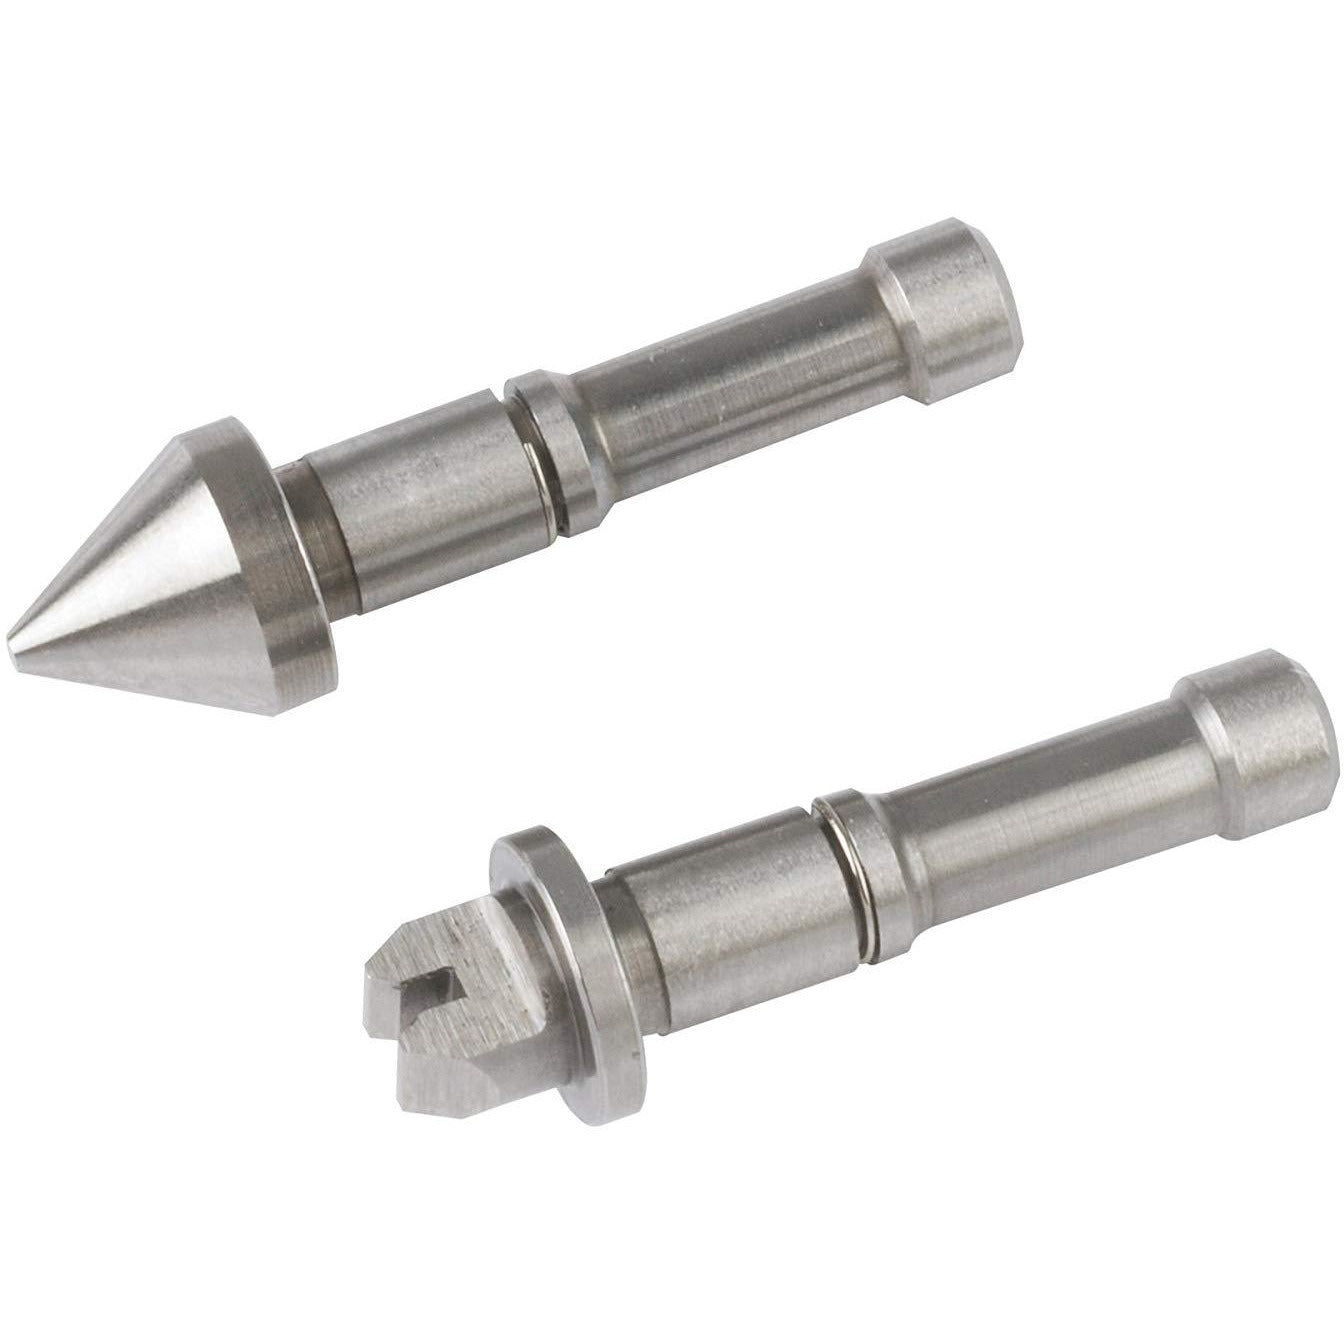 Mitutoyo Anvil and Spindle Tip 0.6-0.9mm/44-28TPI-Mitutoyo-Tool Factory